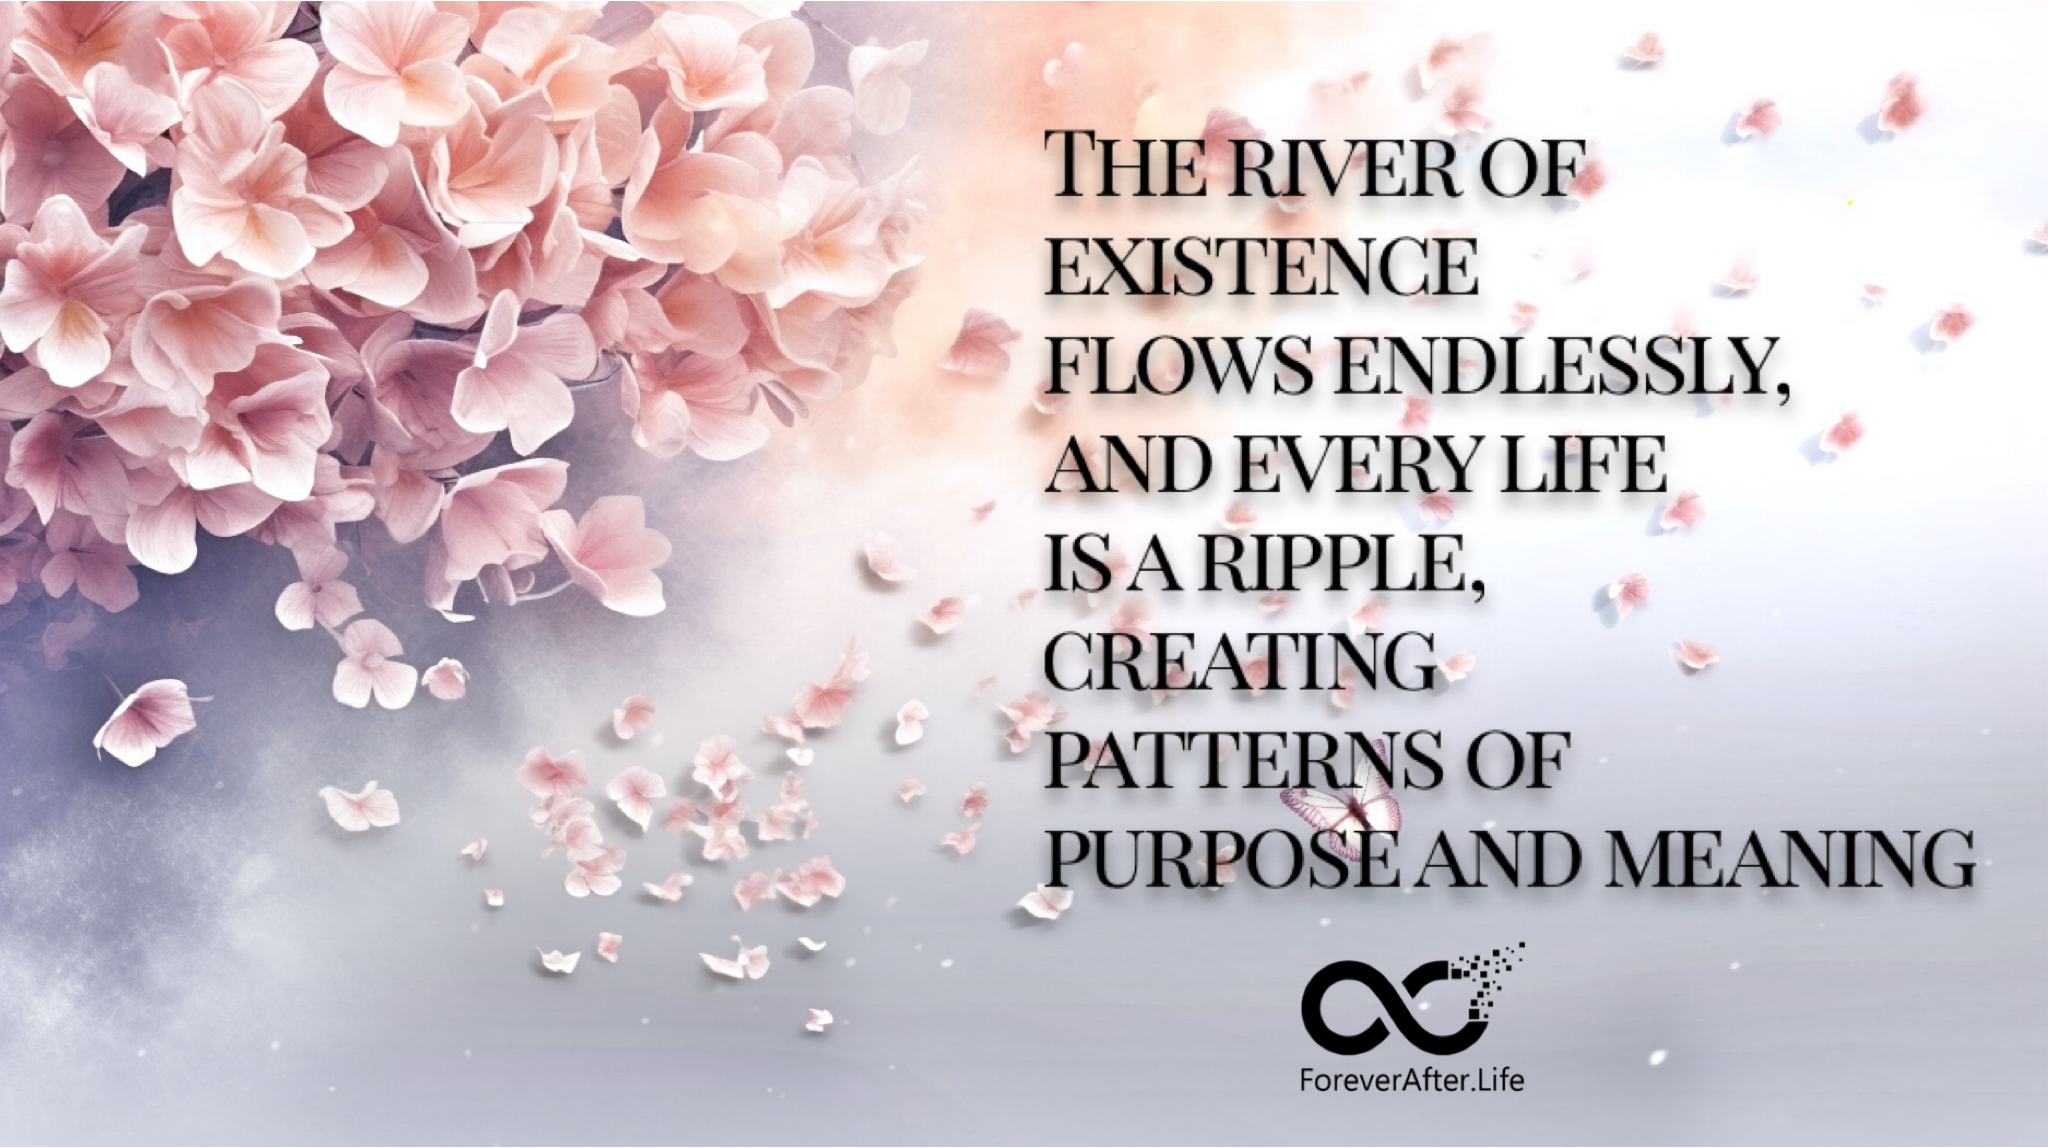 The river of existence flows endlessly, and every life is a ripple, creating patterns of purpose and meaning